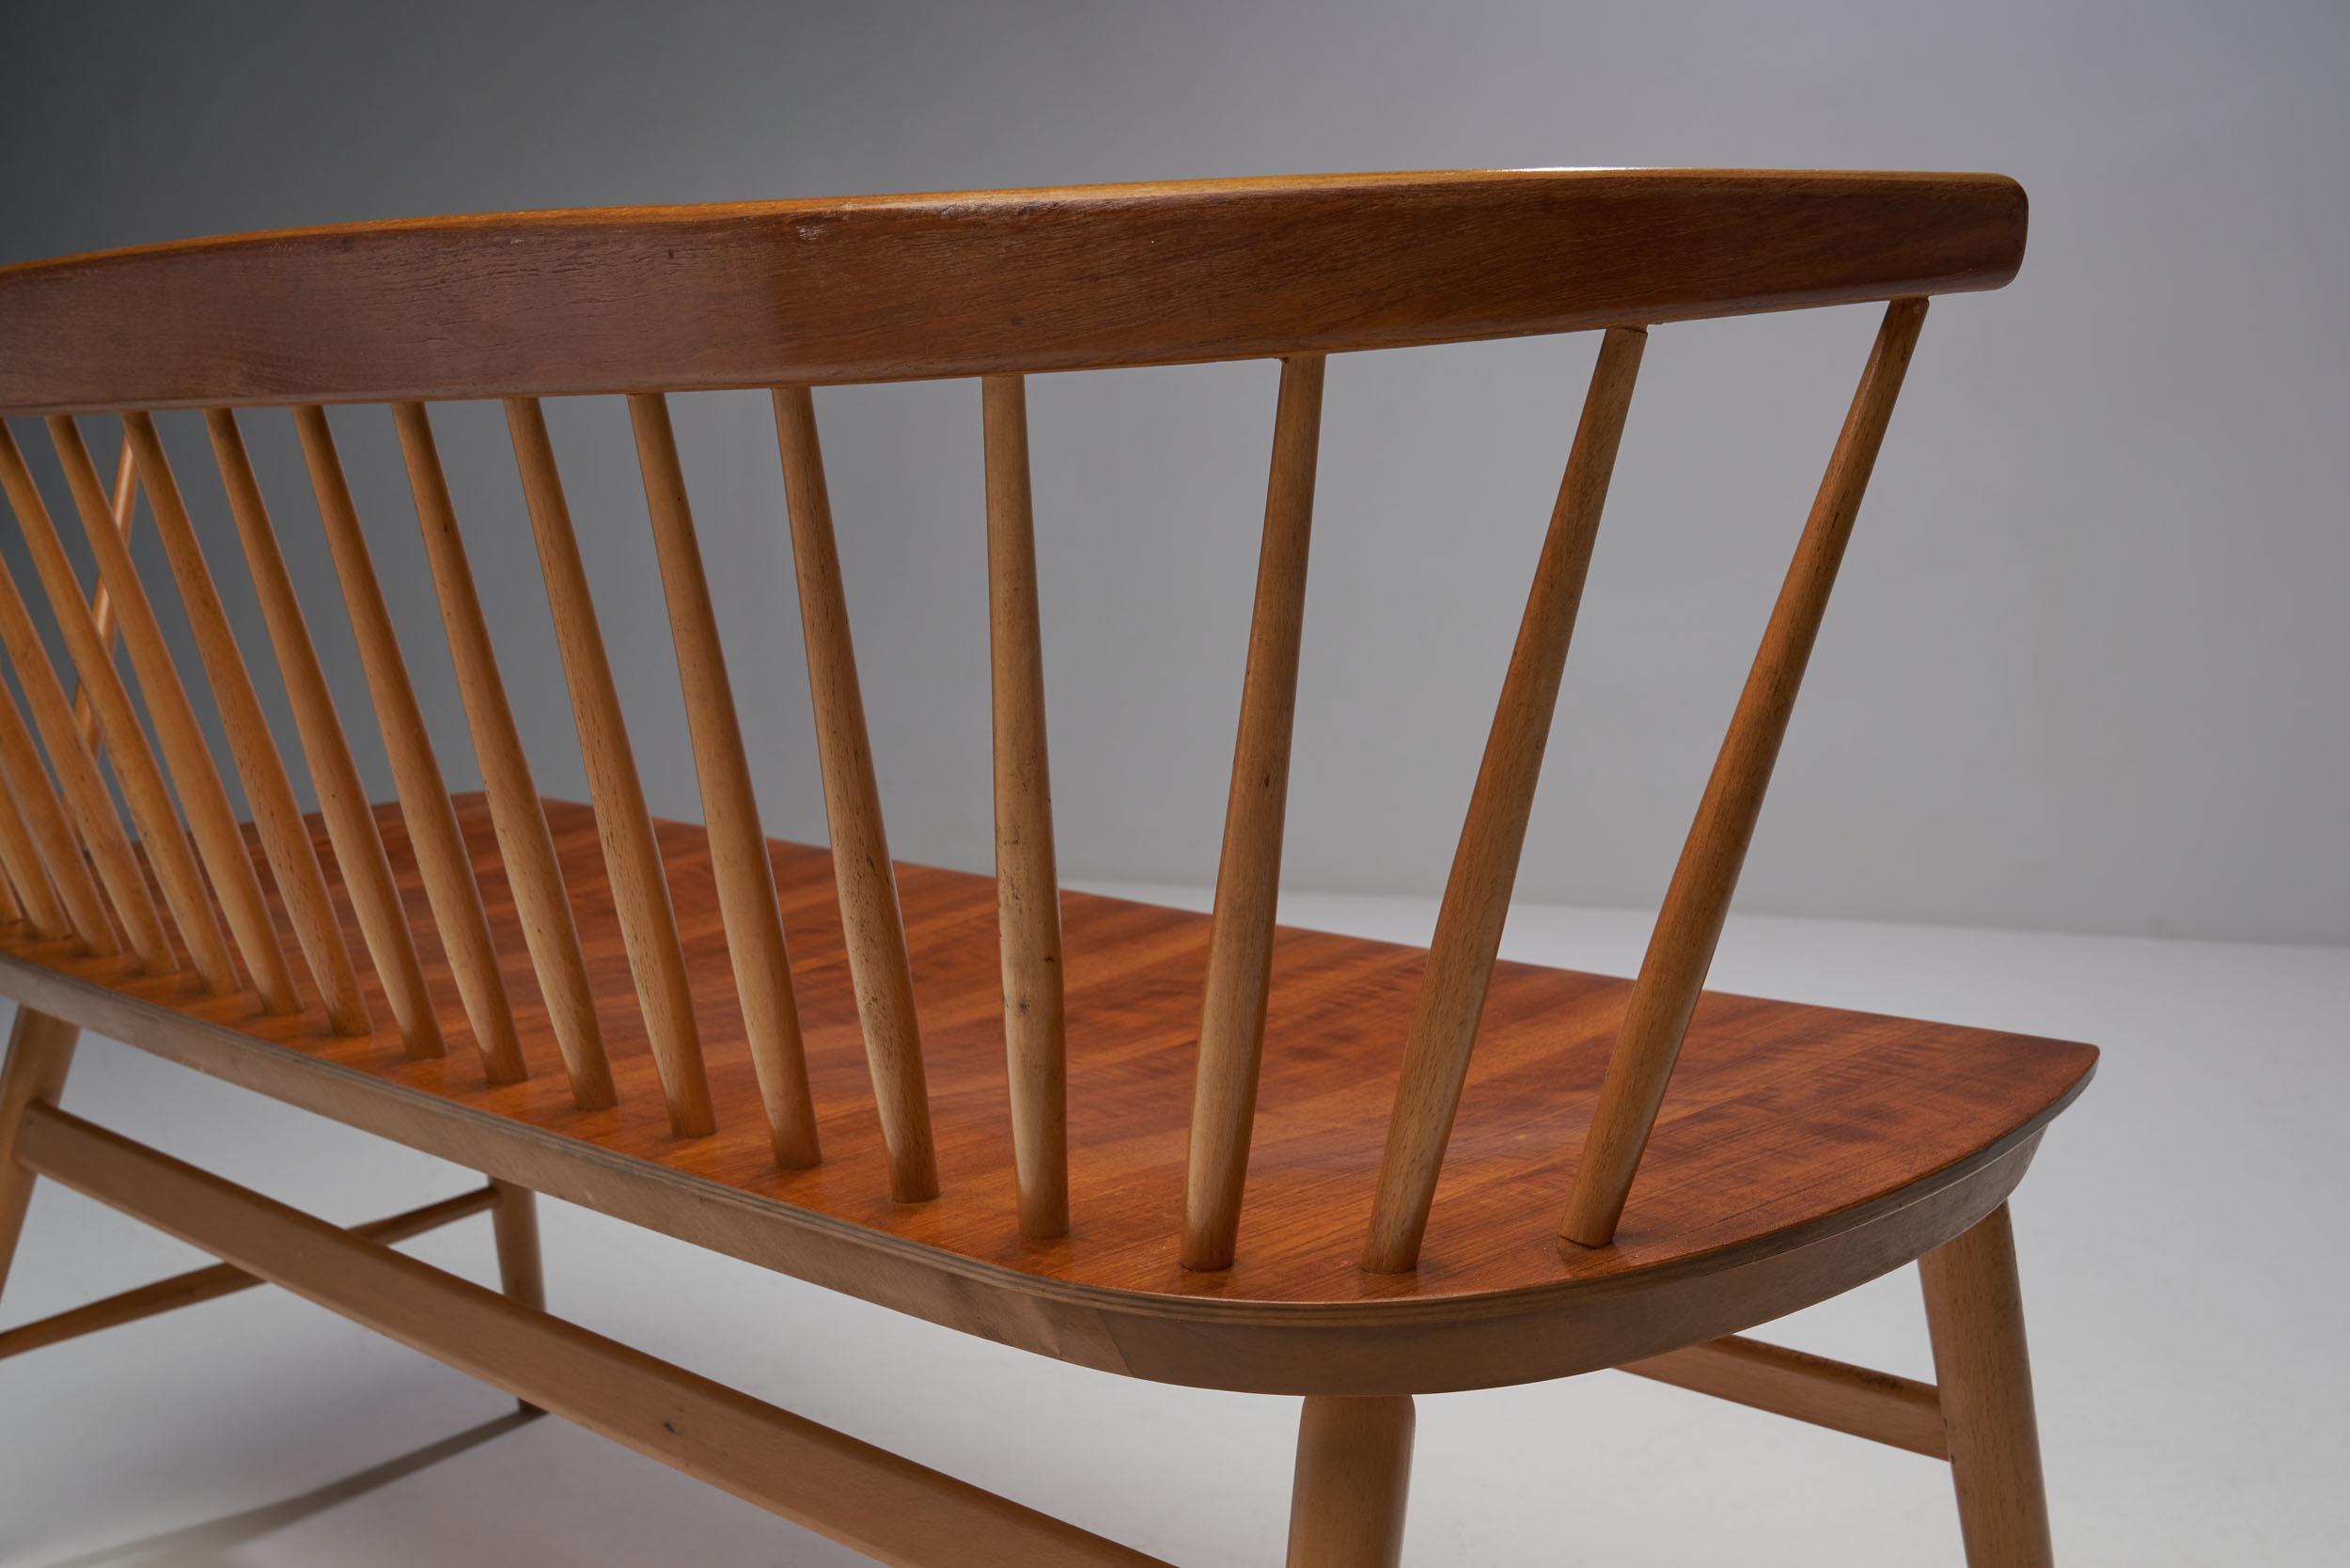 Wood “Florida” Bench by Ebbe Wigell for AB Bröderna Wigells Stolfabrik, Sweden 1950s For Sale